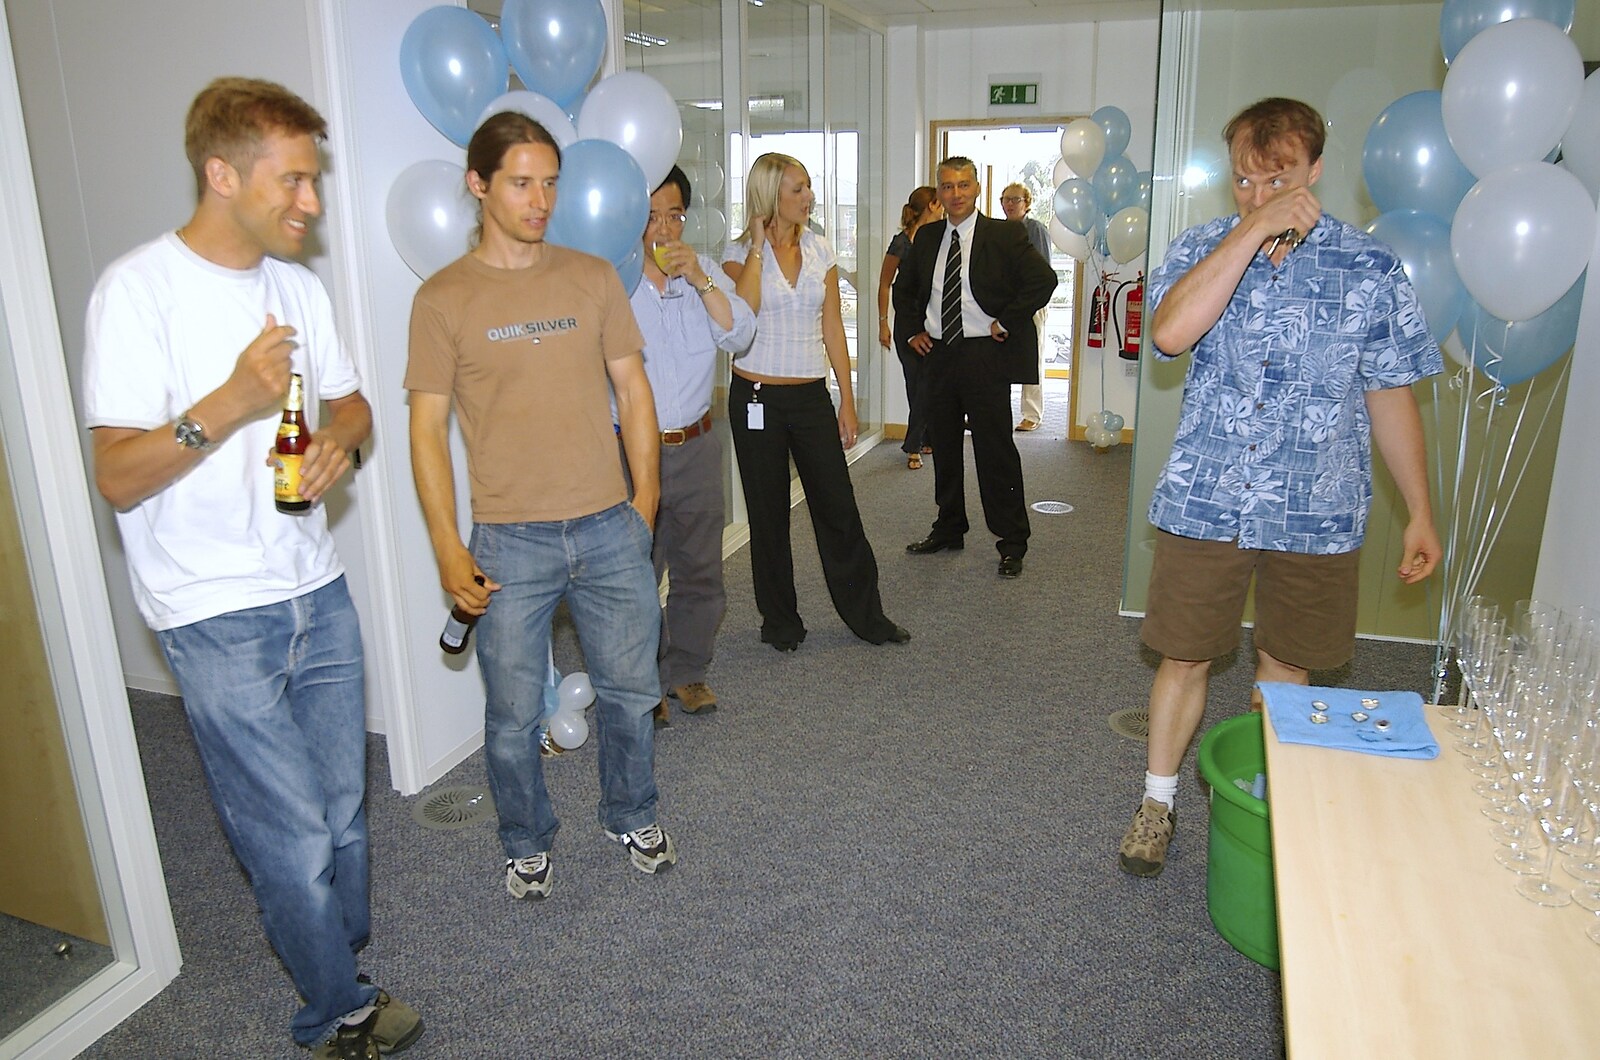 The queue for champagne from Qualcomm's New Office Party, Science Park, Milton Road, Cambridge - 3rd July 2006